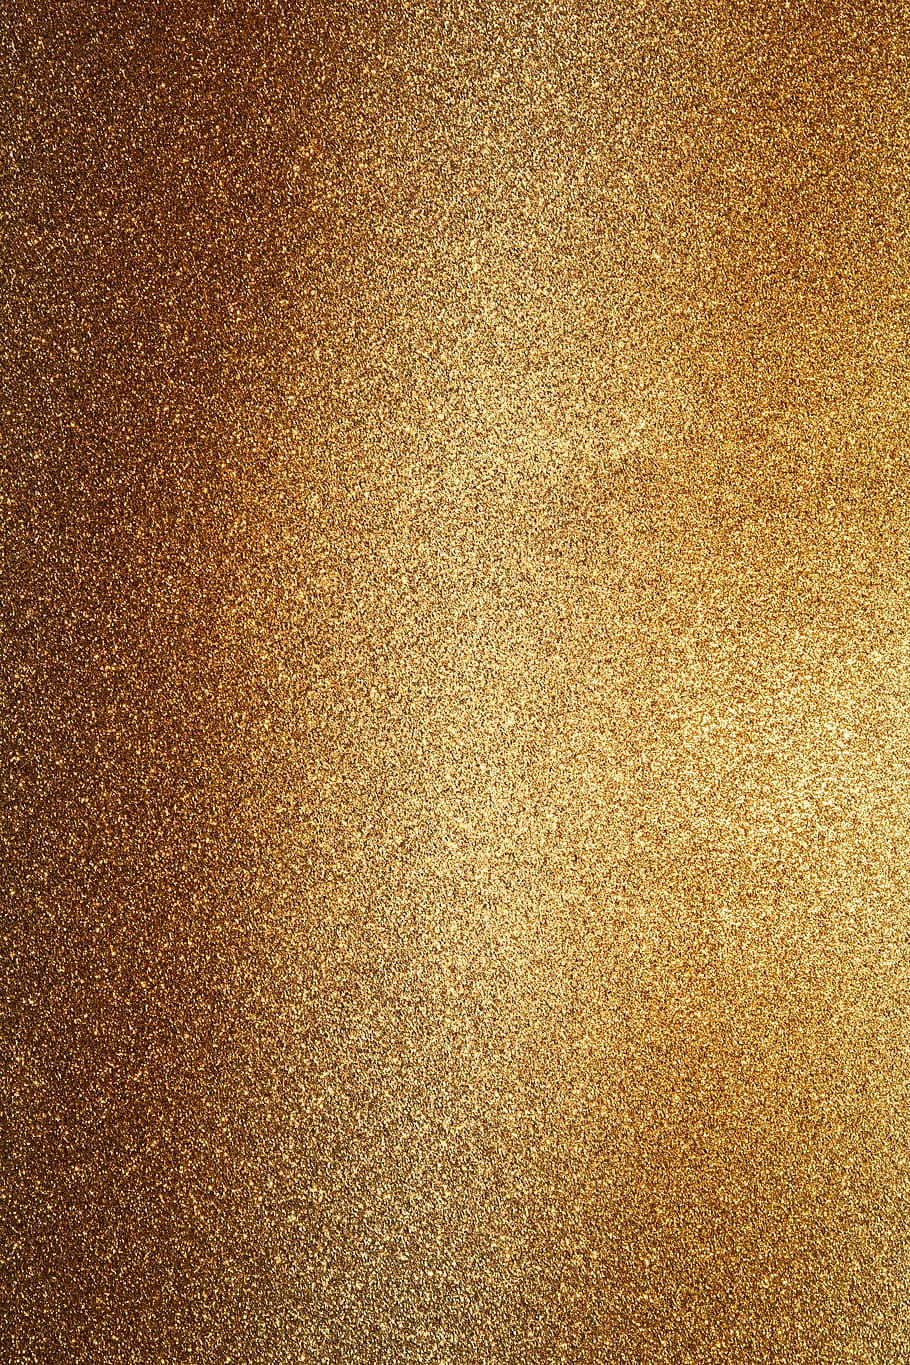 close, brown, surface, background, gold, cute, glitter, glittering background, effect, gold colored